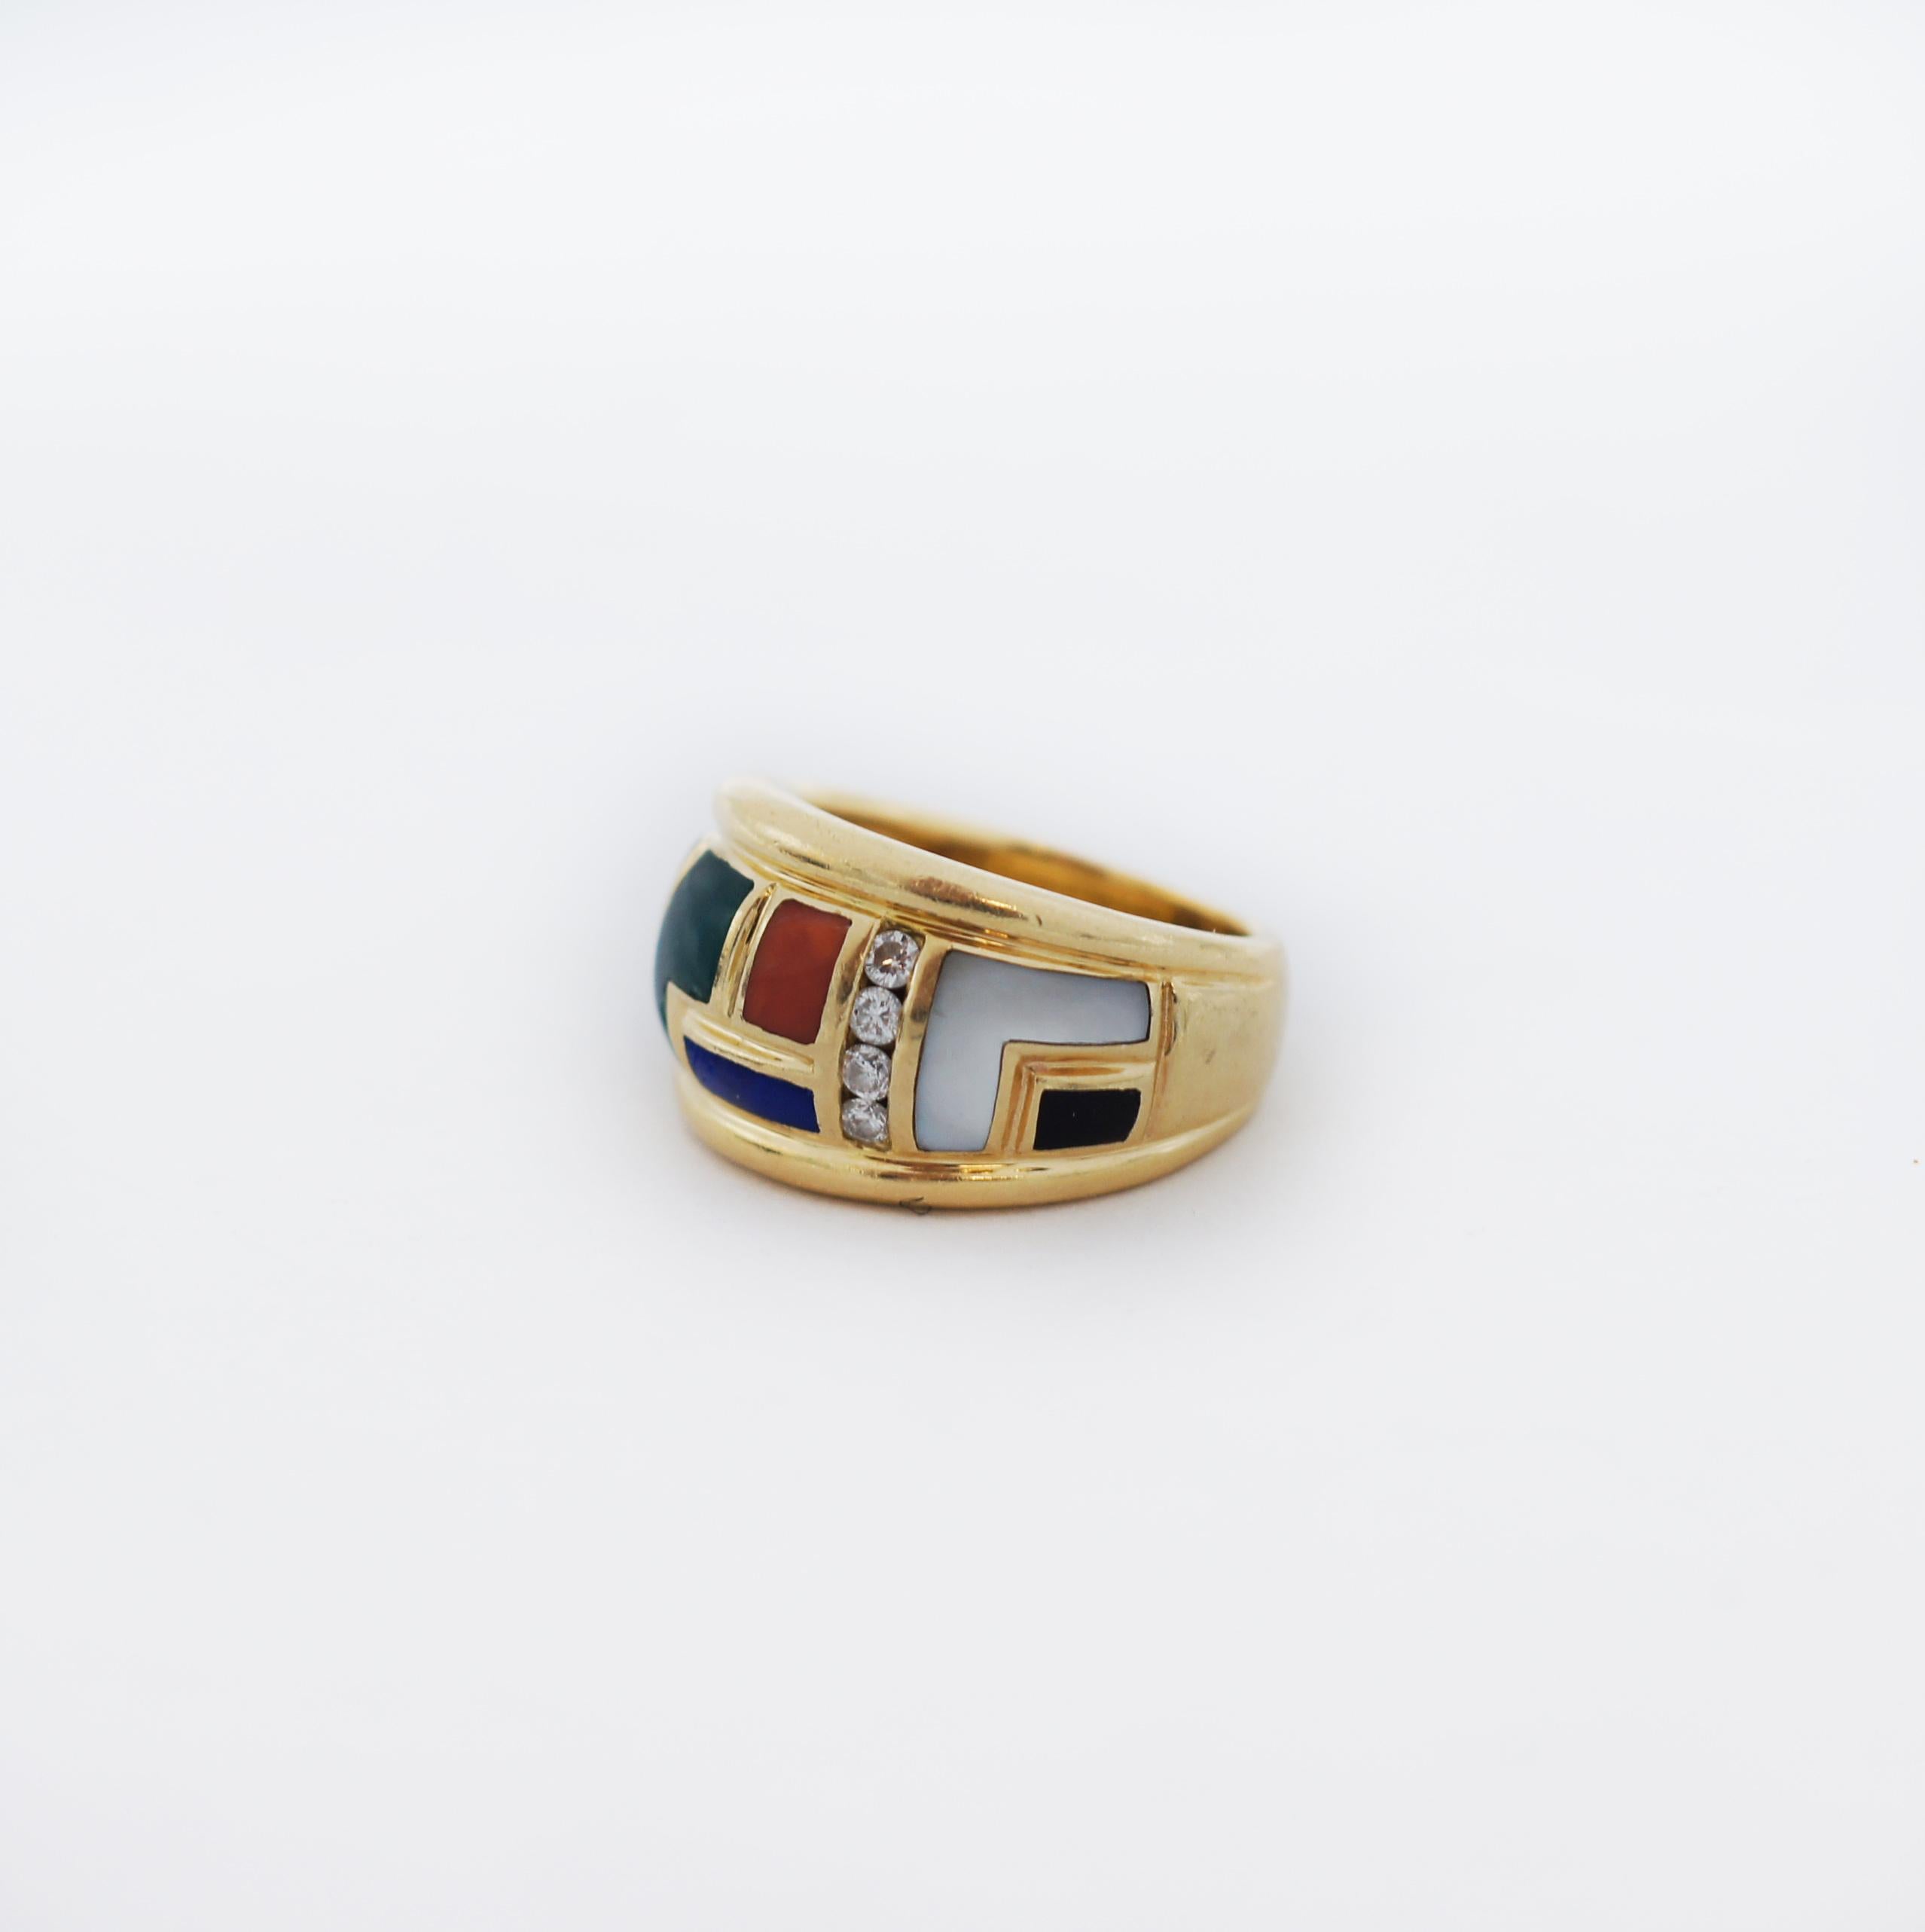 Wide band ring is inlaid to front with a mosaic of calibré cut gemstones
Featuring ultramarine lapis lazuli, green chalcedony, white mother-of-pearl, black onyx, and orange coral
Channel of round brilliant cut diamonds weigh in total approximately